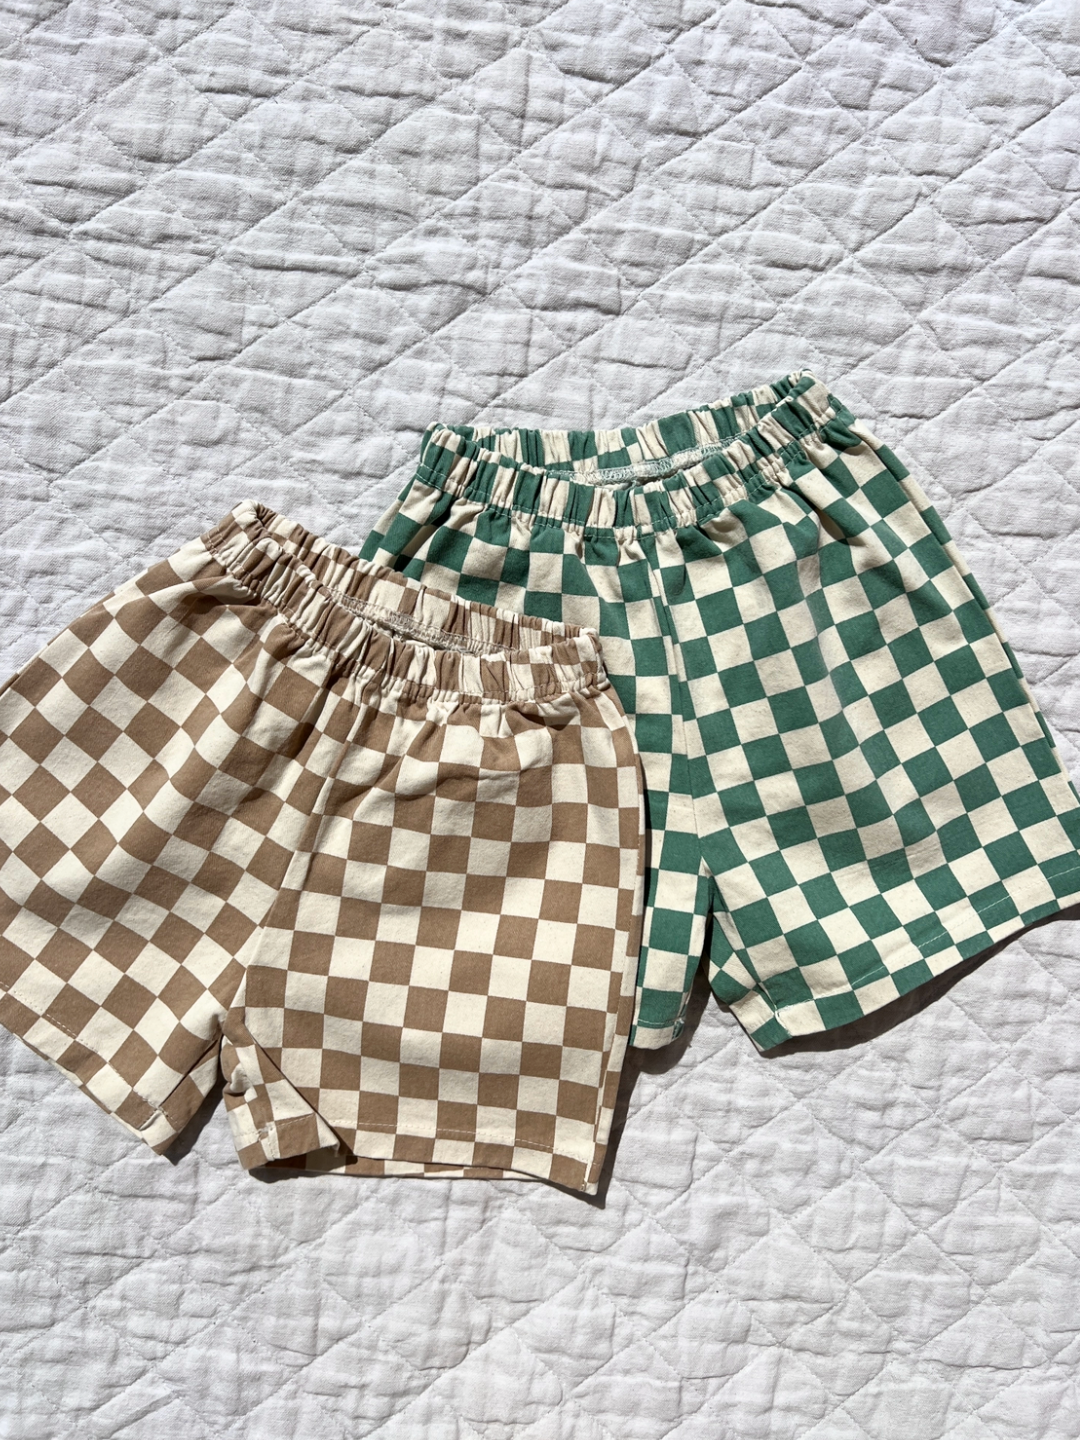 Tan | Two pars of kids Frankie shorts are laid out on a white canvas quilt. The pair on top is tan and ecru checkerboard, the pair behind is teal and ecru checkerboard.